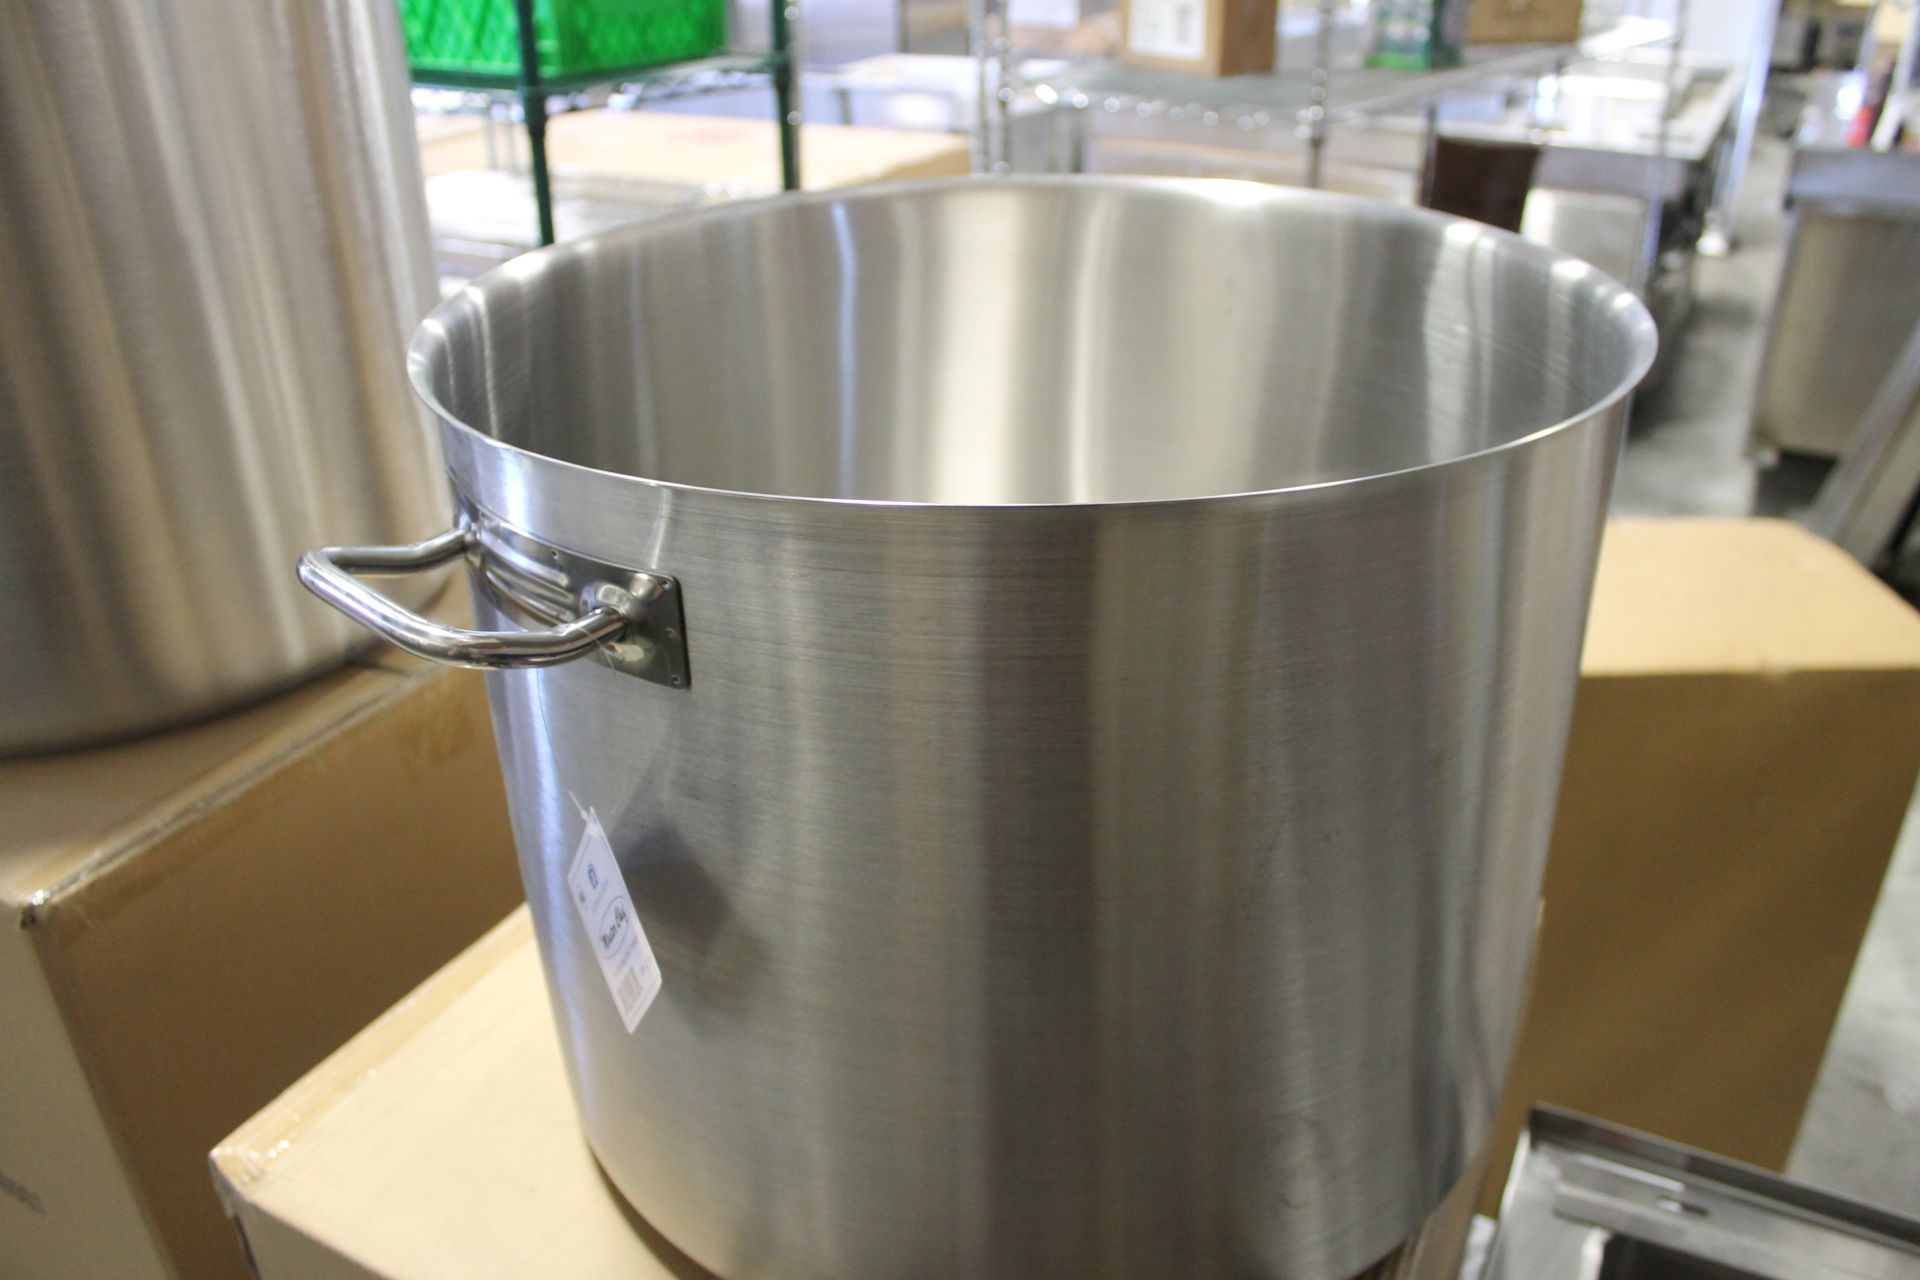 Heavy Duty 80qt Crown Select Stainless Steel Stock Pot - no lid - Image 4 of 5